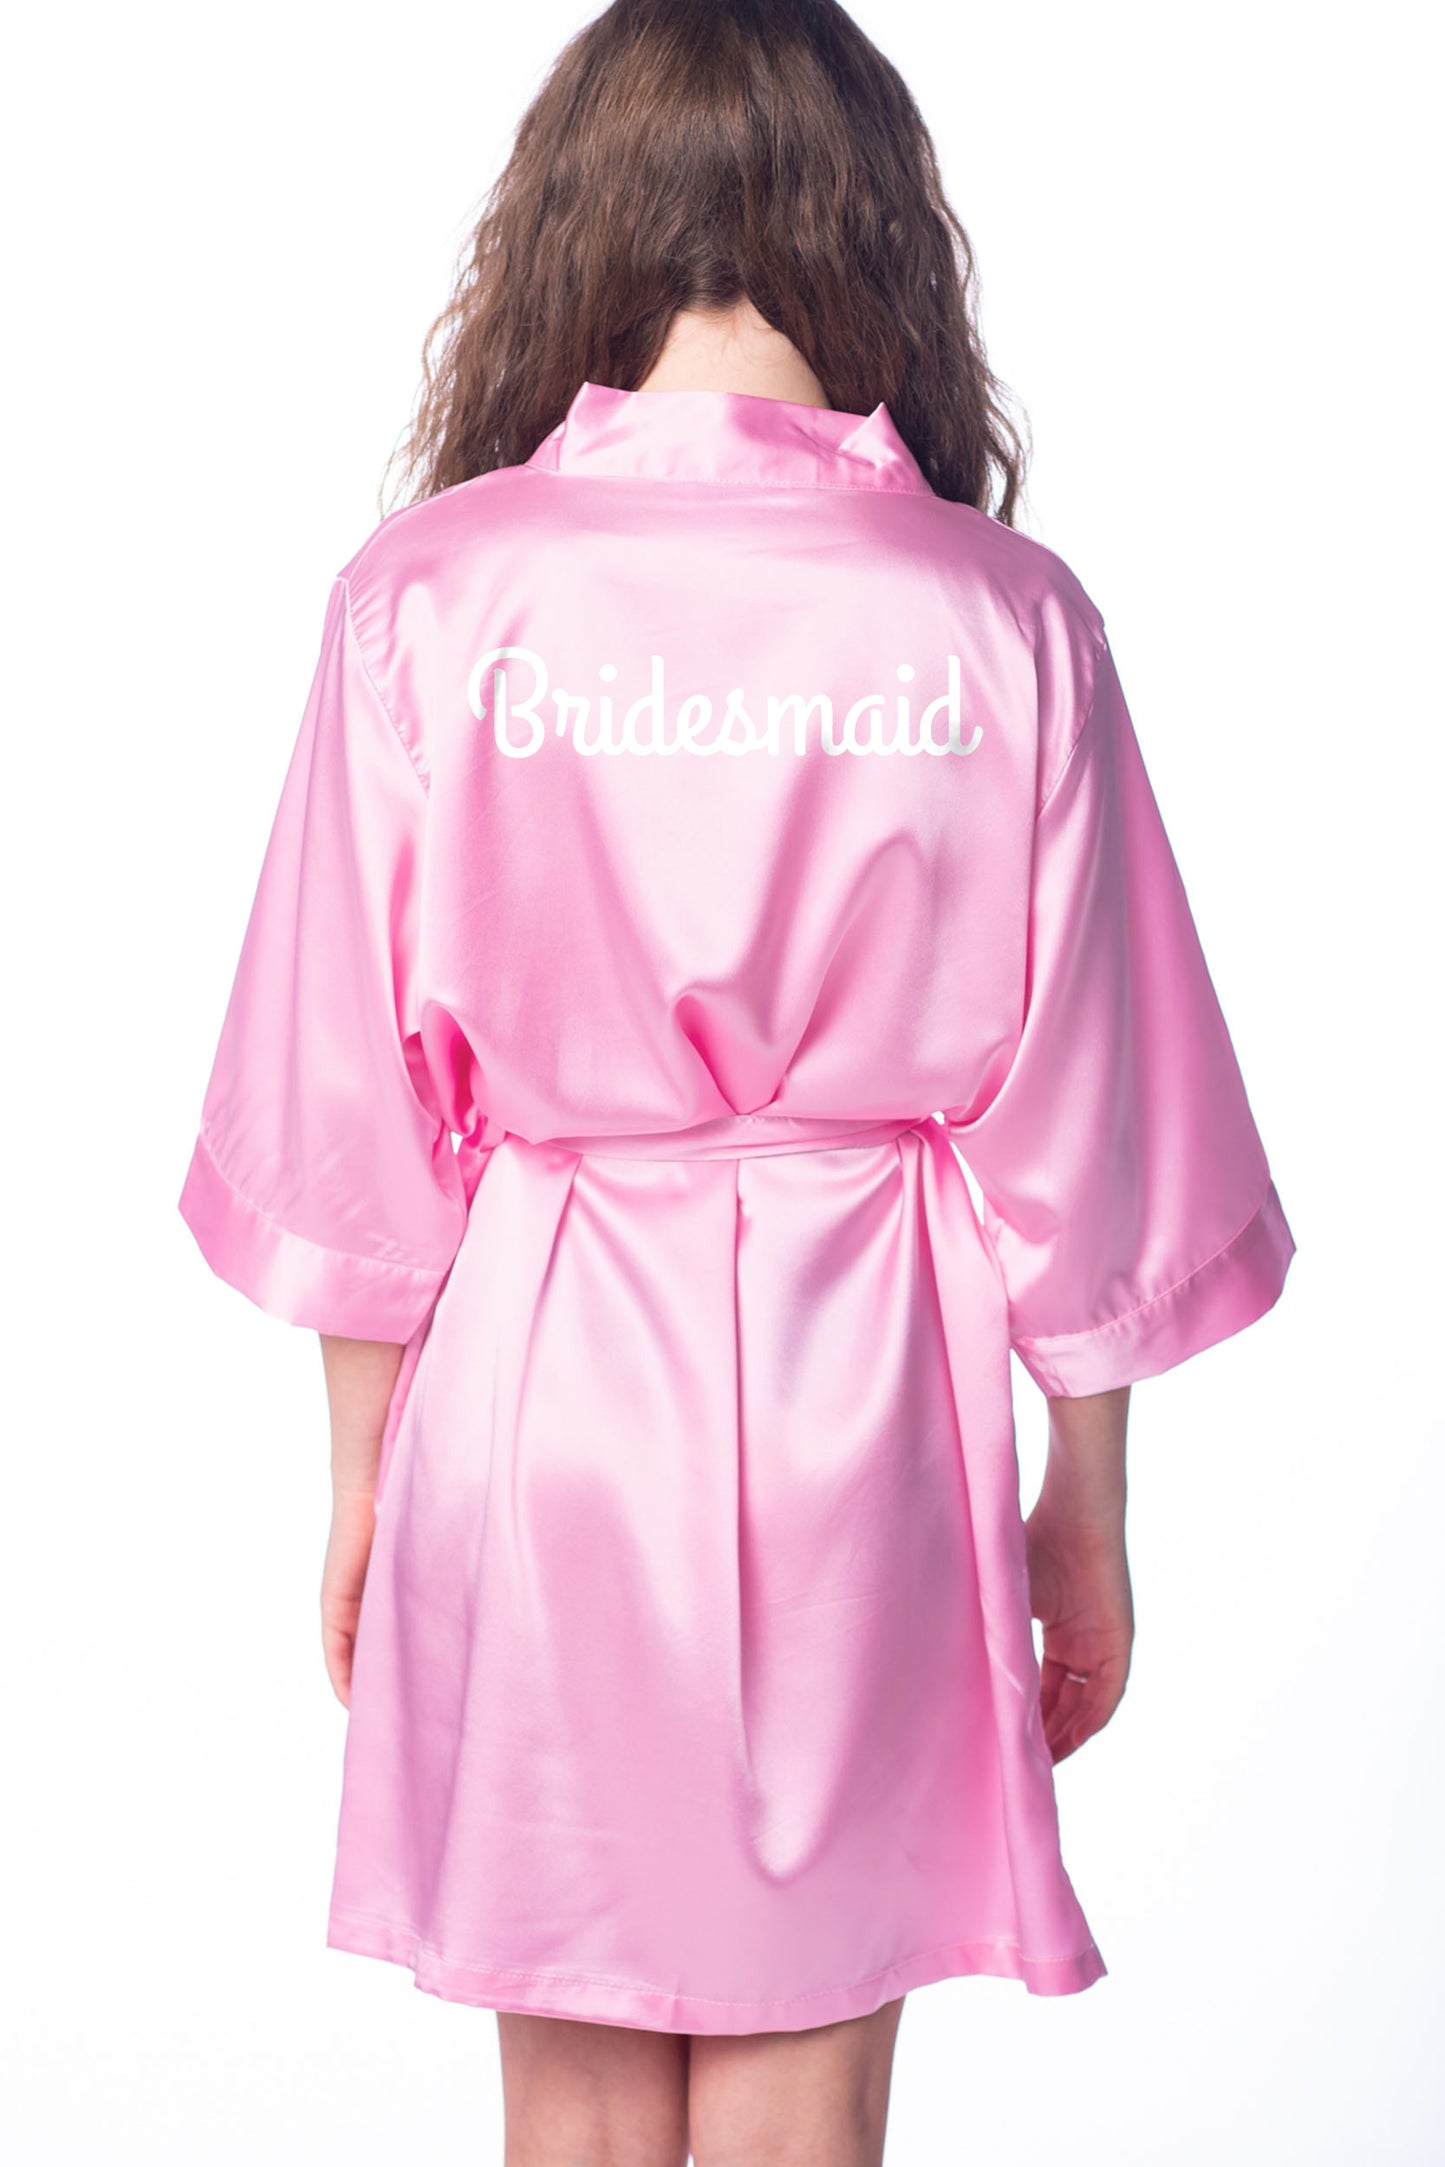 S/M "Bridesmaid" Pink Satin Robe - Grand Hotel in White (Clearance Item)